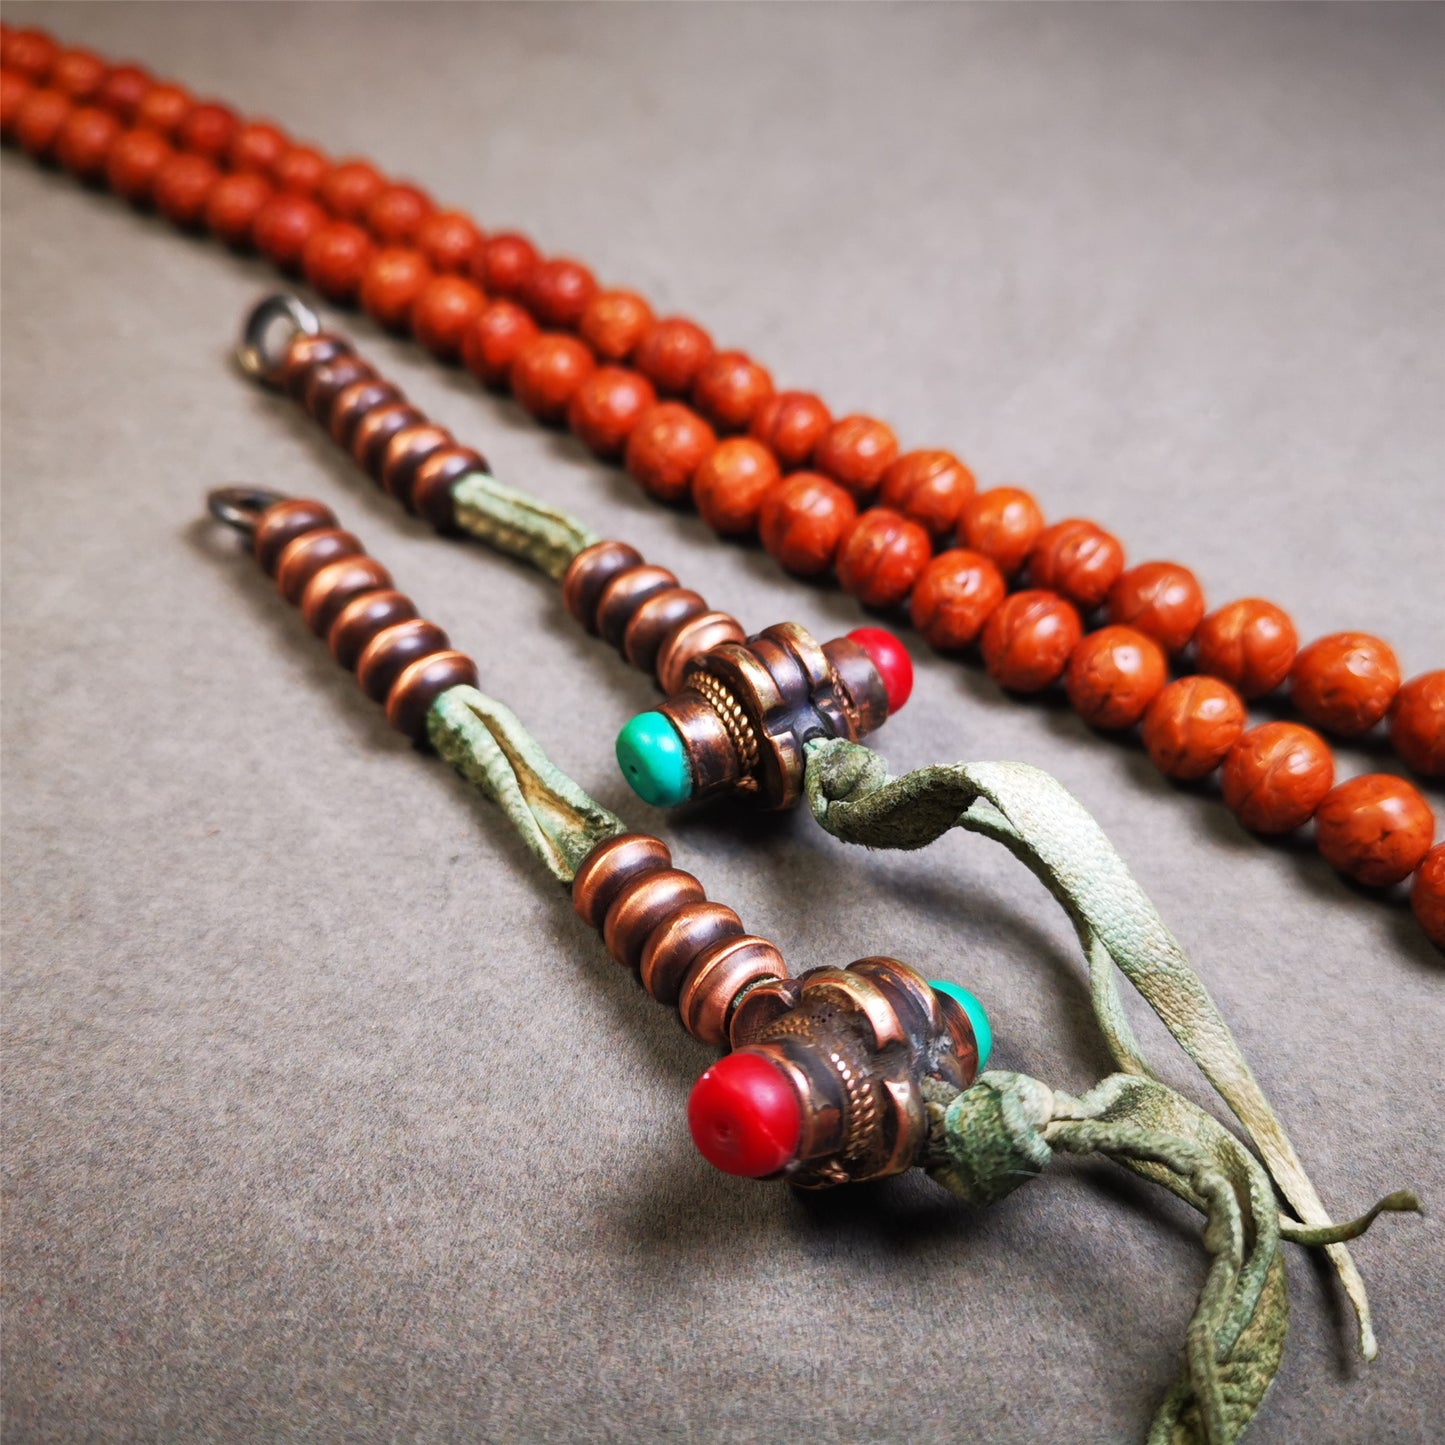 9mm Copper Prayer Bead Counters with Agate Pendant